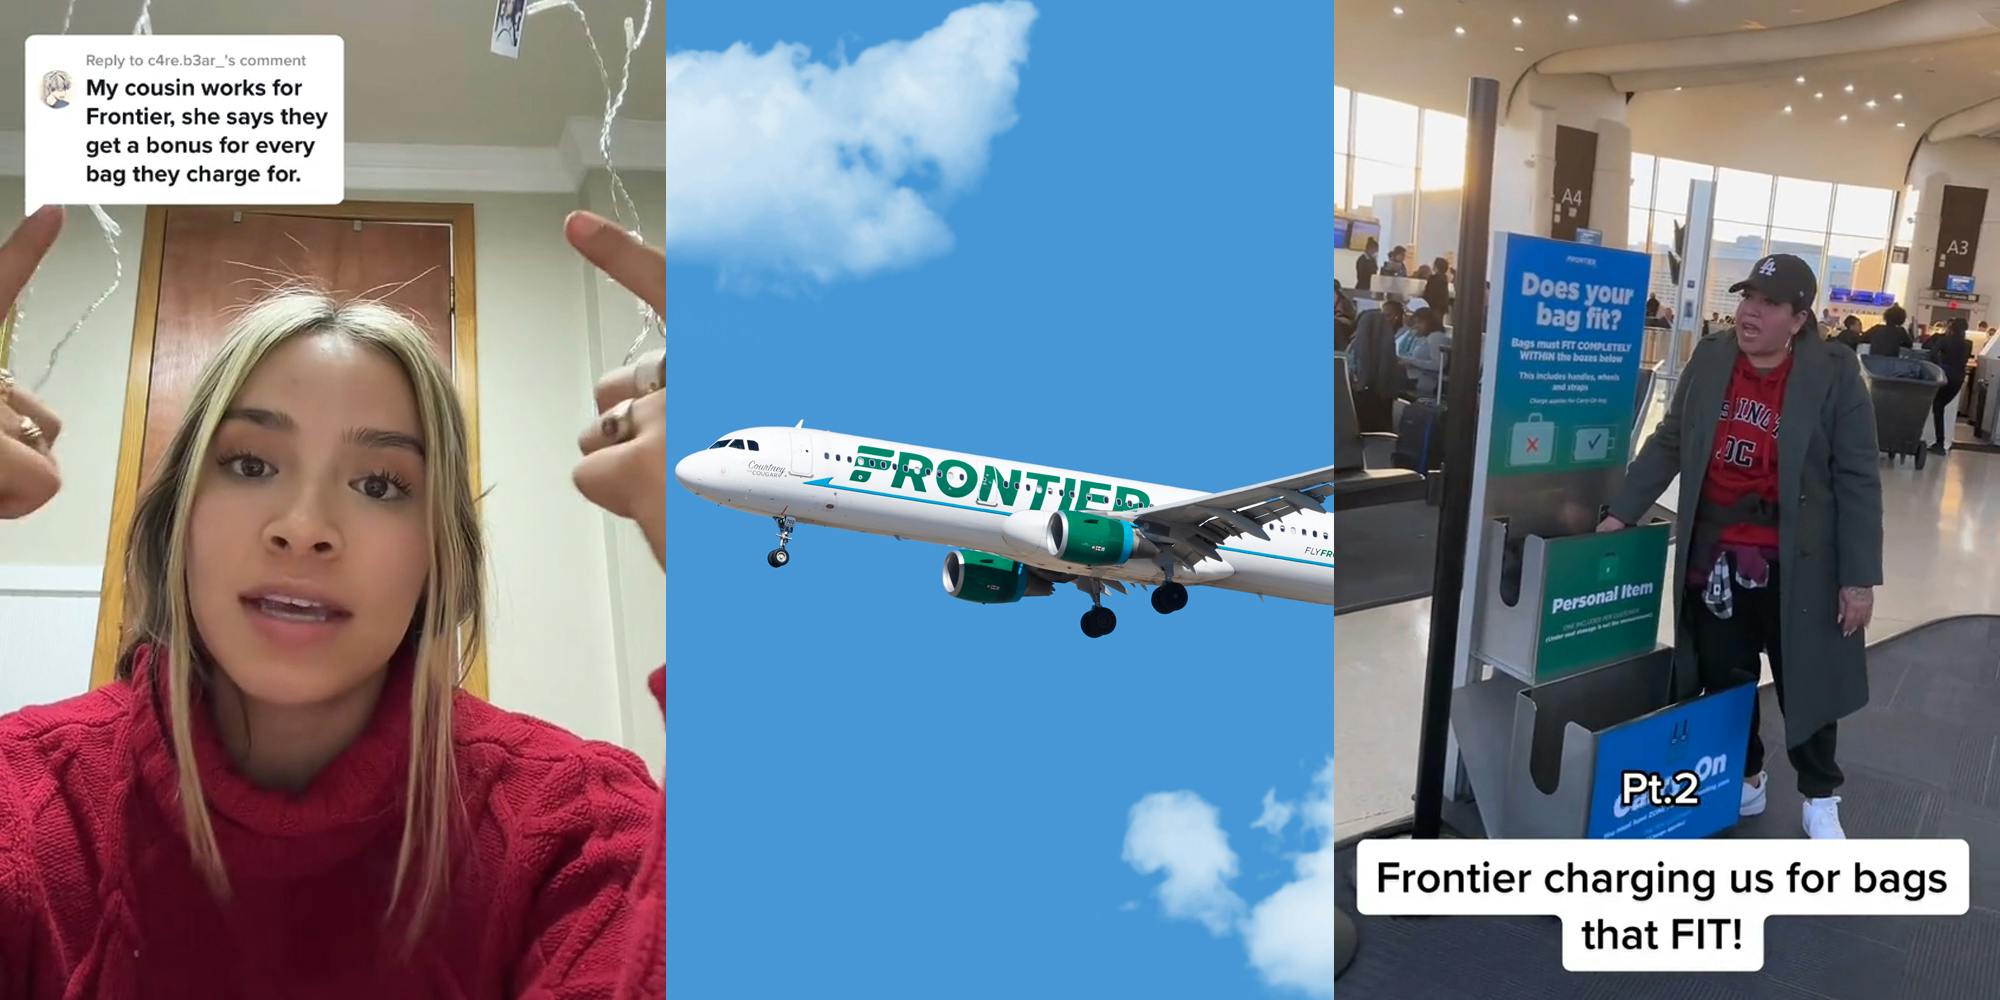 Frontier airlines customer speaking pointing to caption "My cousin works for Frontier, she says they get a bonus for every bag they charge for." (l) Frontier airlines airplane in blue sky with clouds (c) person with hand in bag size check area of Frontier airlines with caption "Frontier charging us for bags that FIT!" (r)